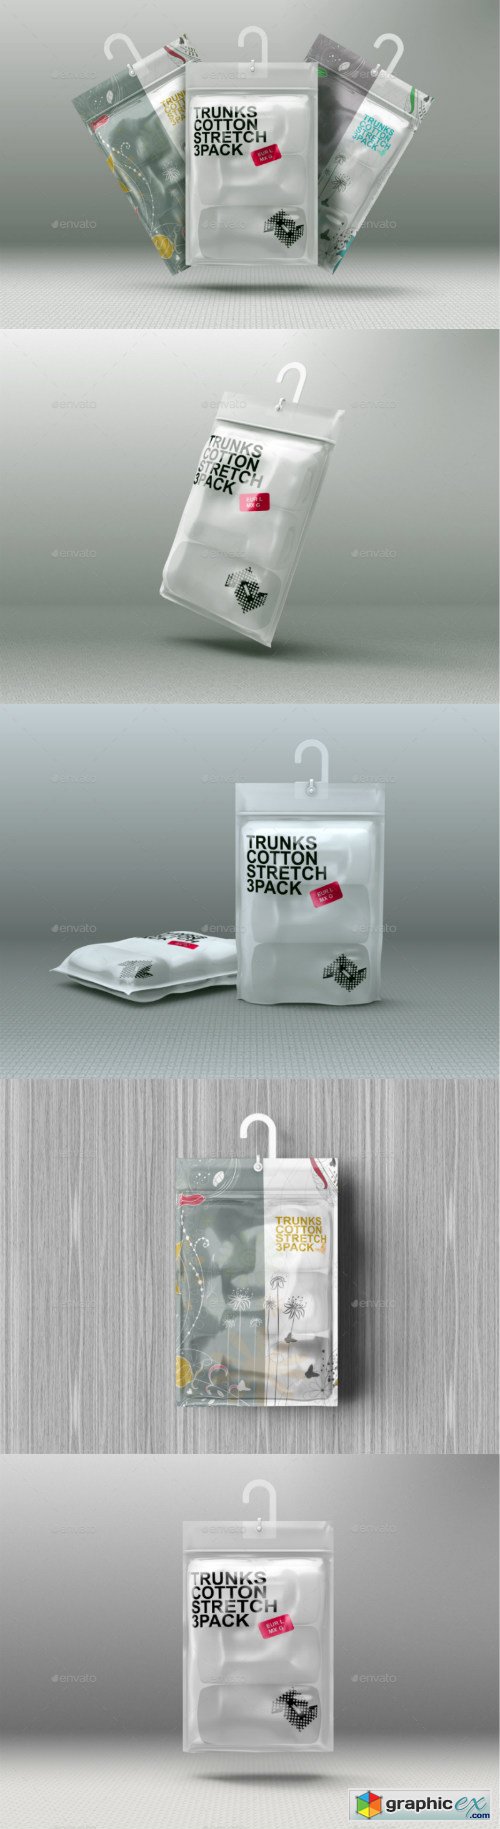 Hanging Storage Product Bag Pouch Mockup